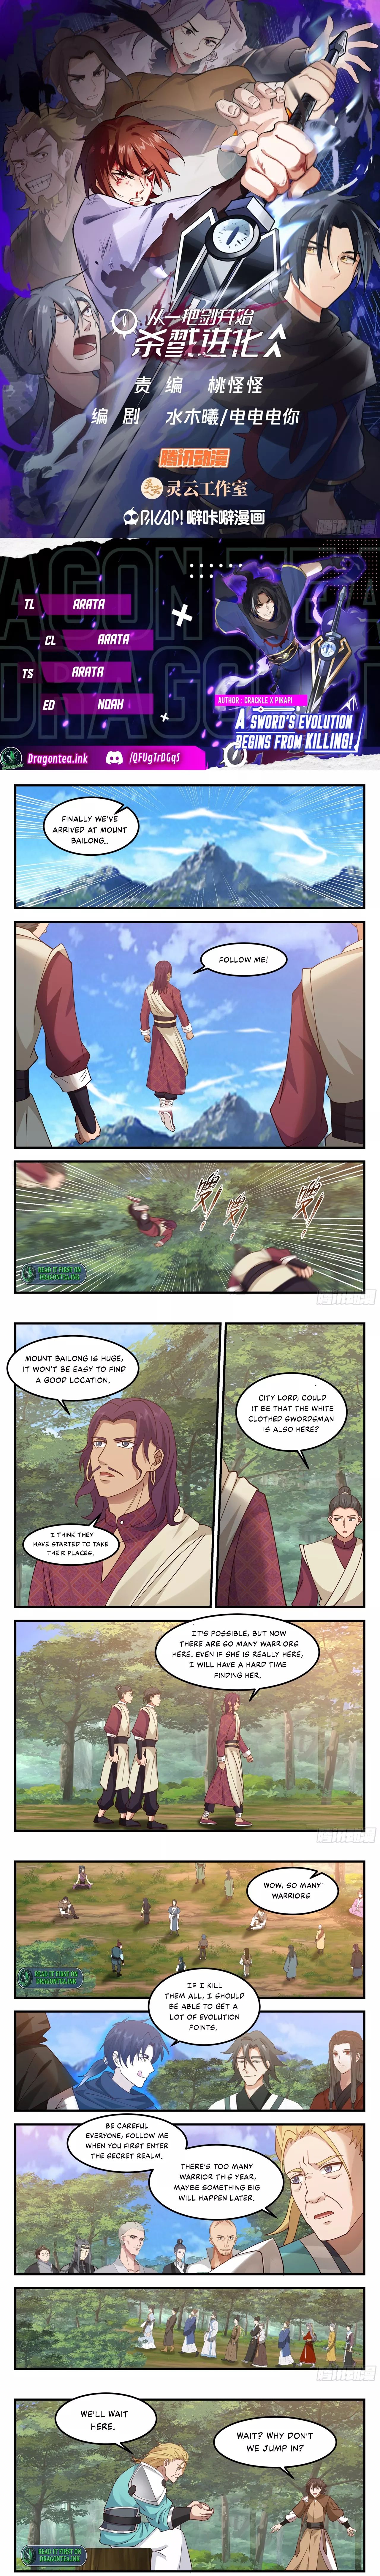 Killing Evolution From A Sword - Page 2